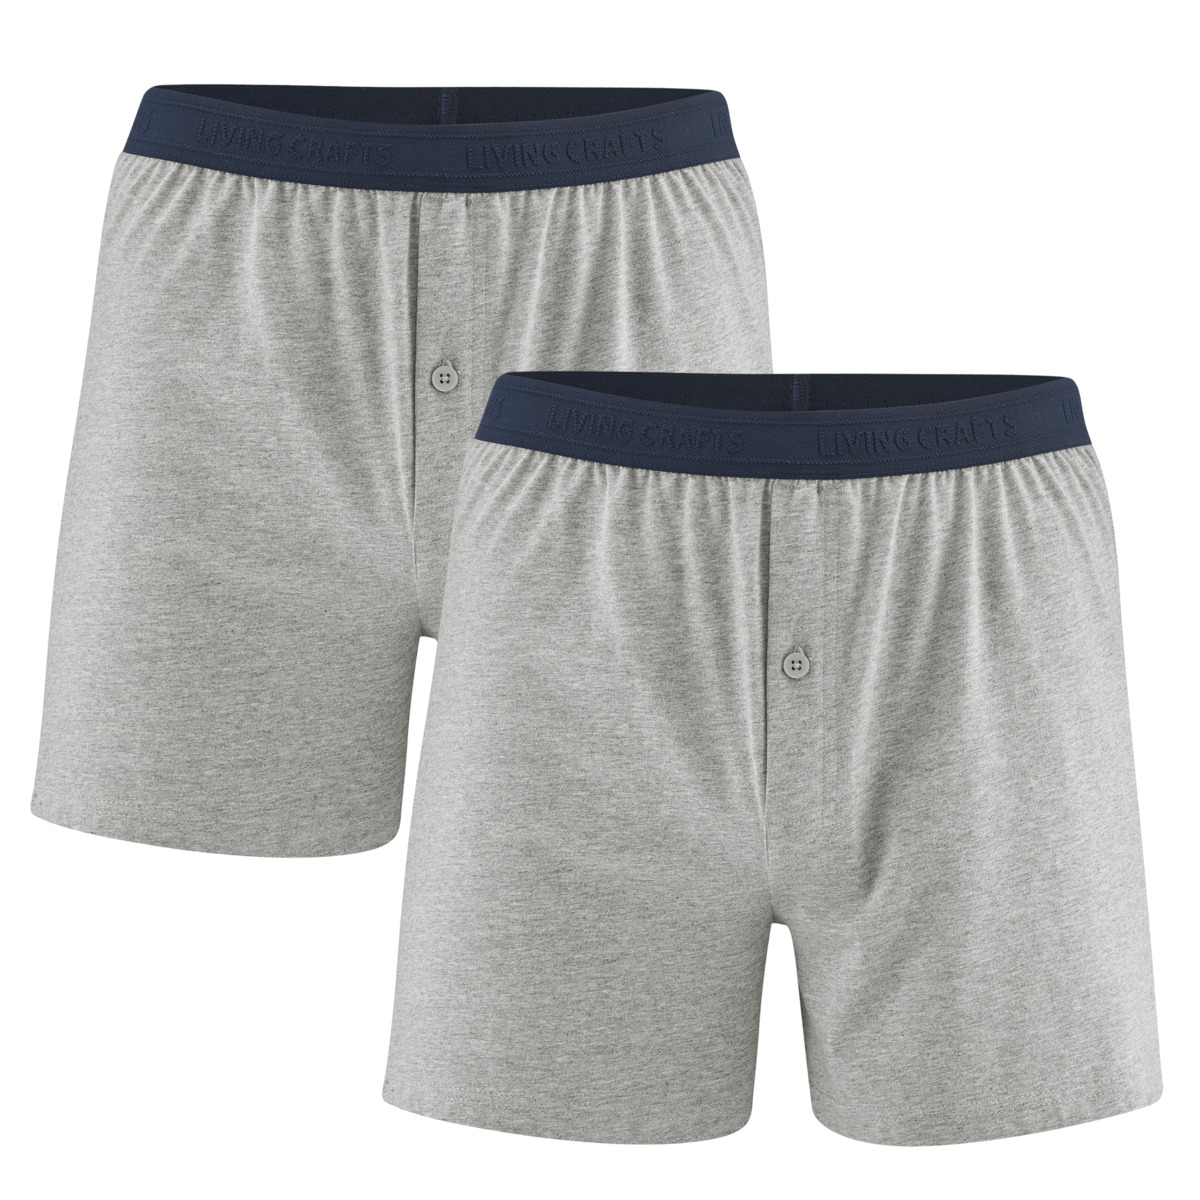 Grey Boxer shorts, pack of 2, ETHAN